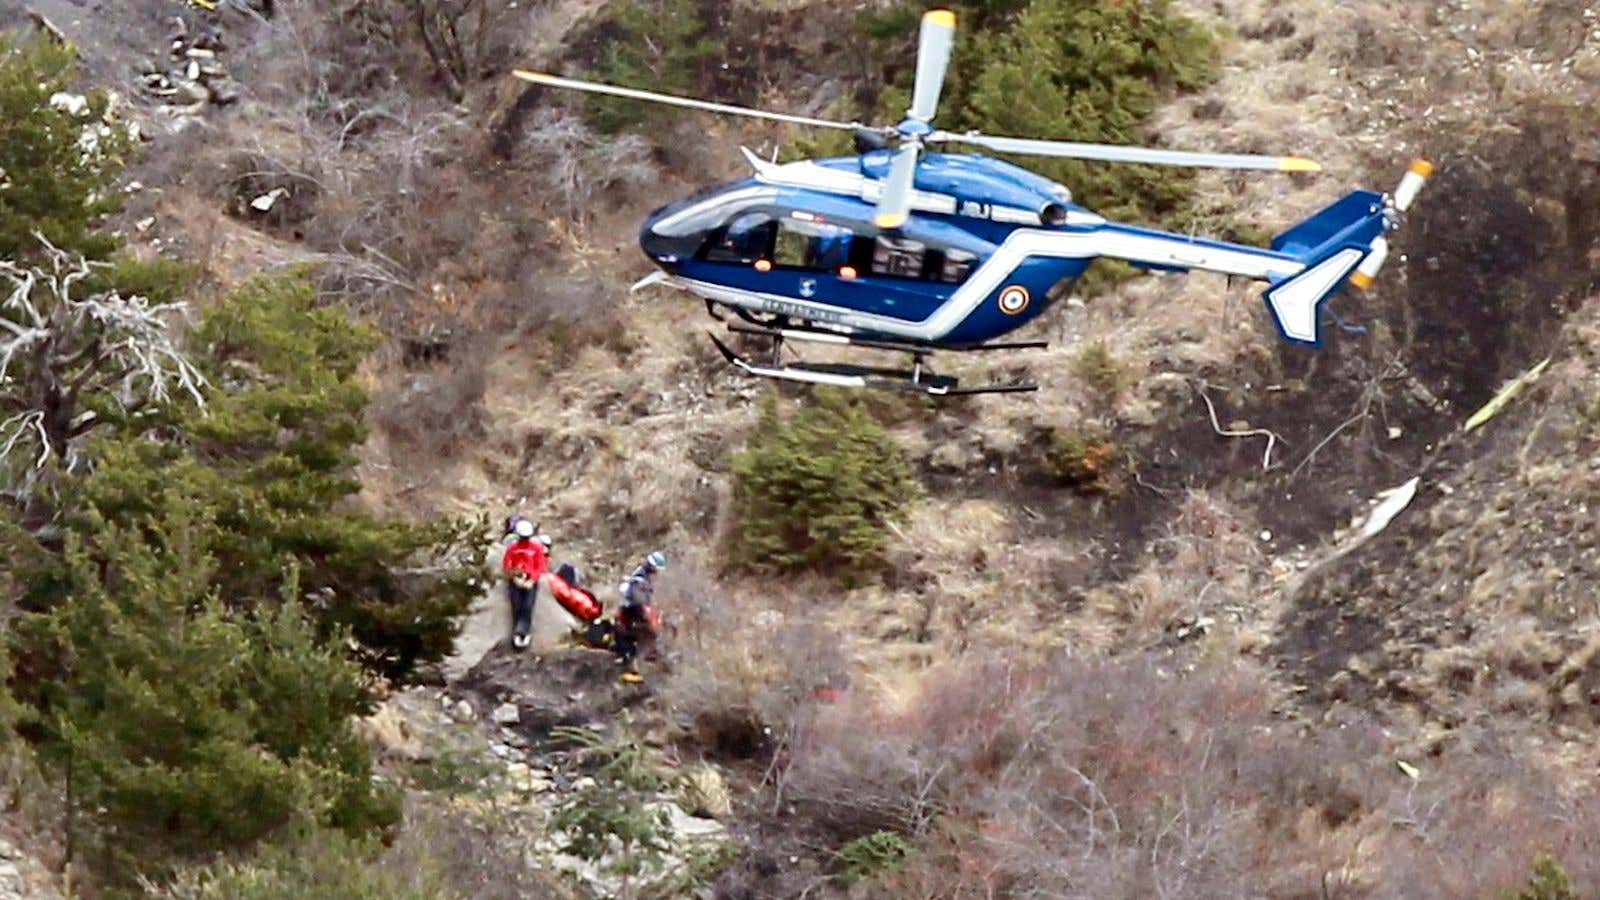 A French gendarme helicopter flies over the crash site of an Airbus A320 in the French Alps, as investigators sift through the debris.